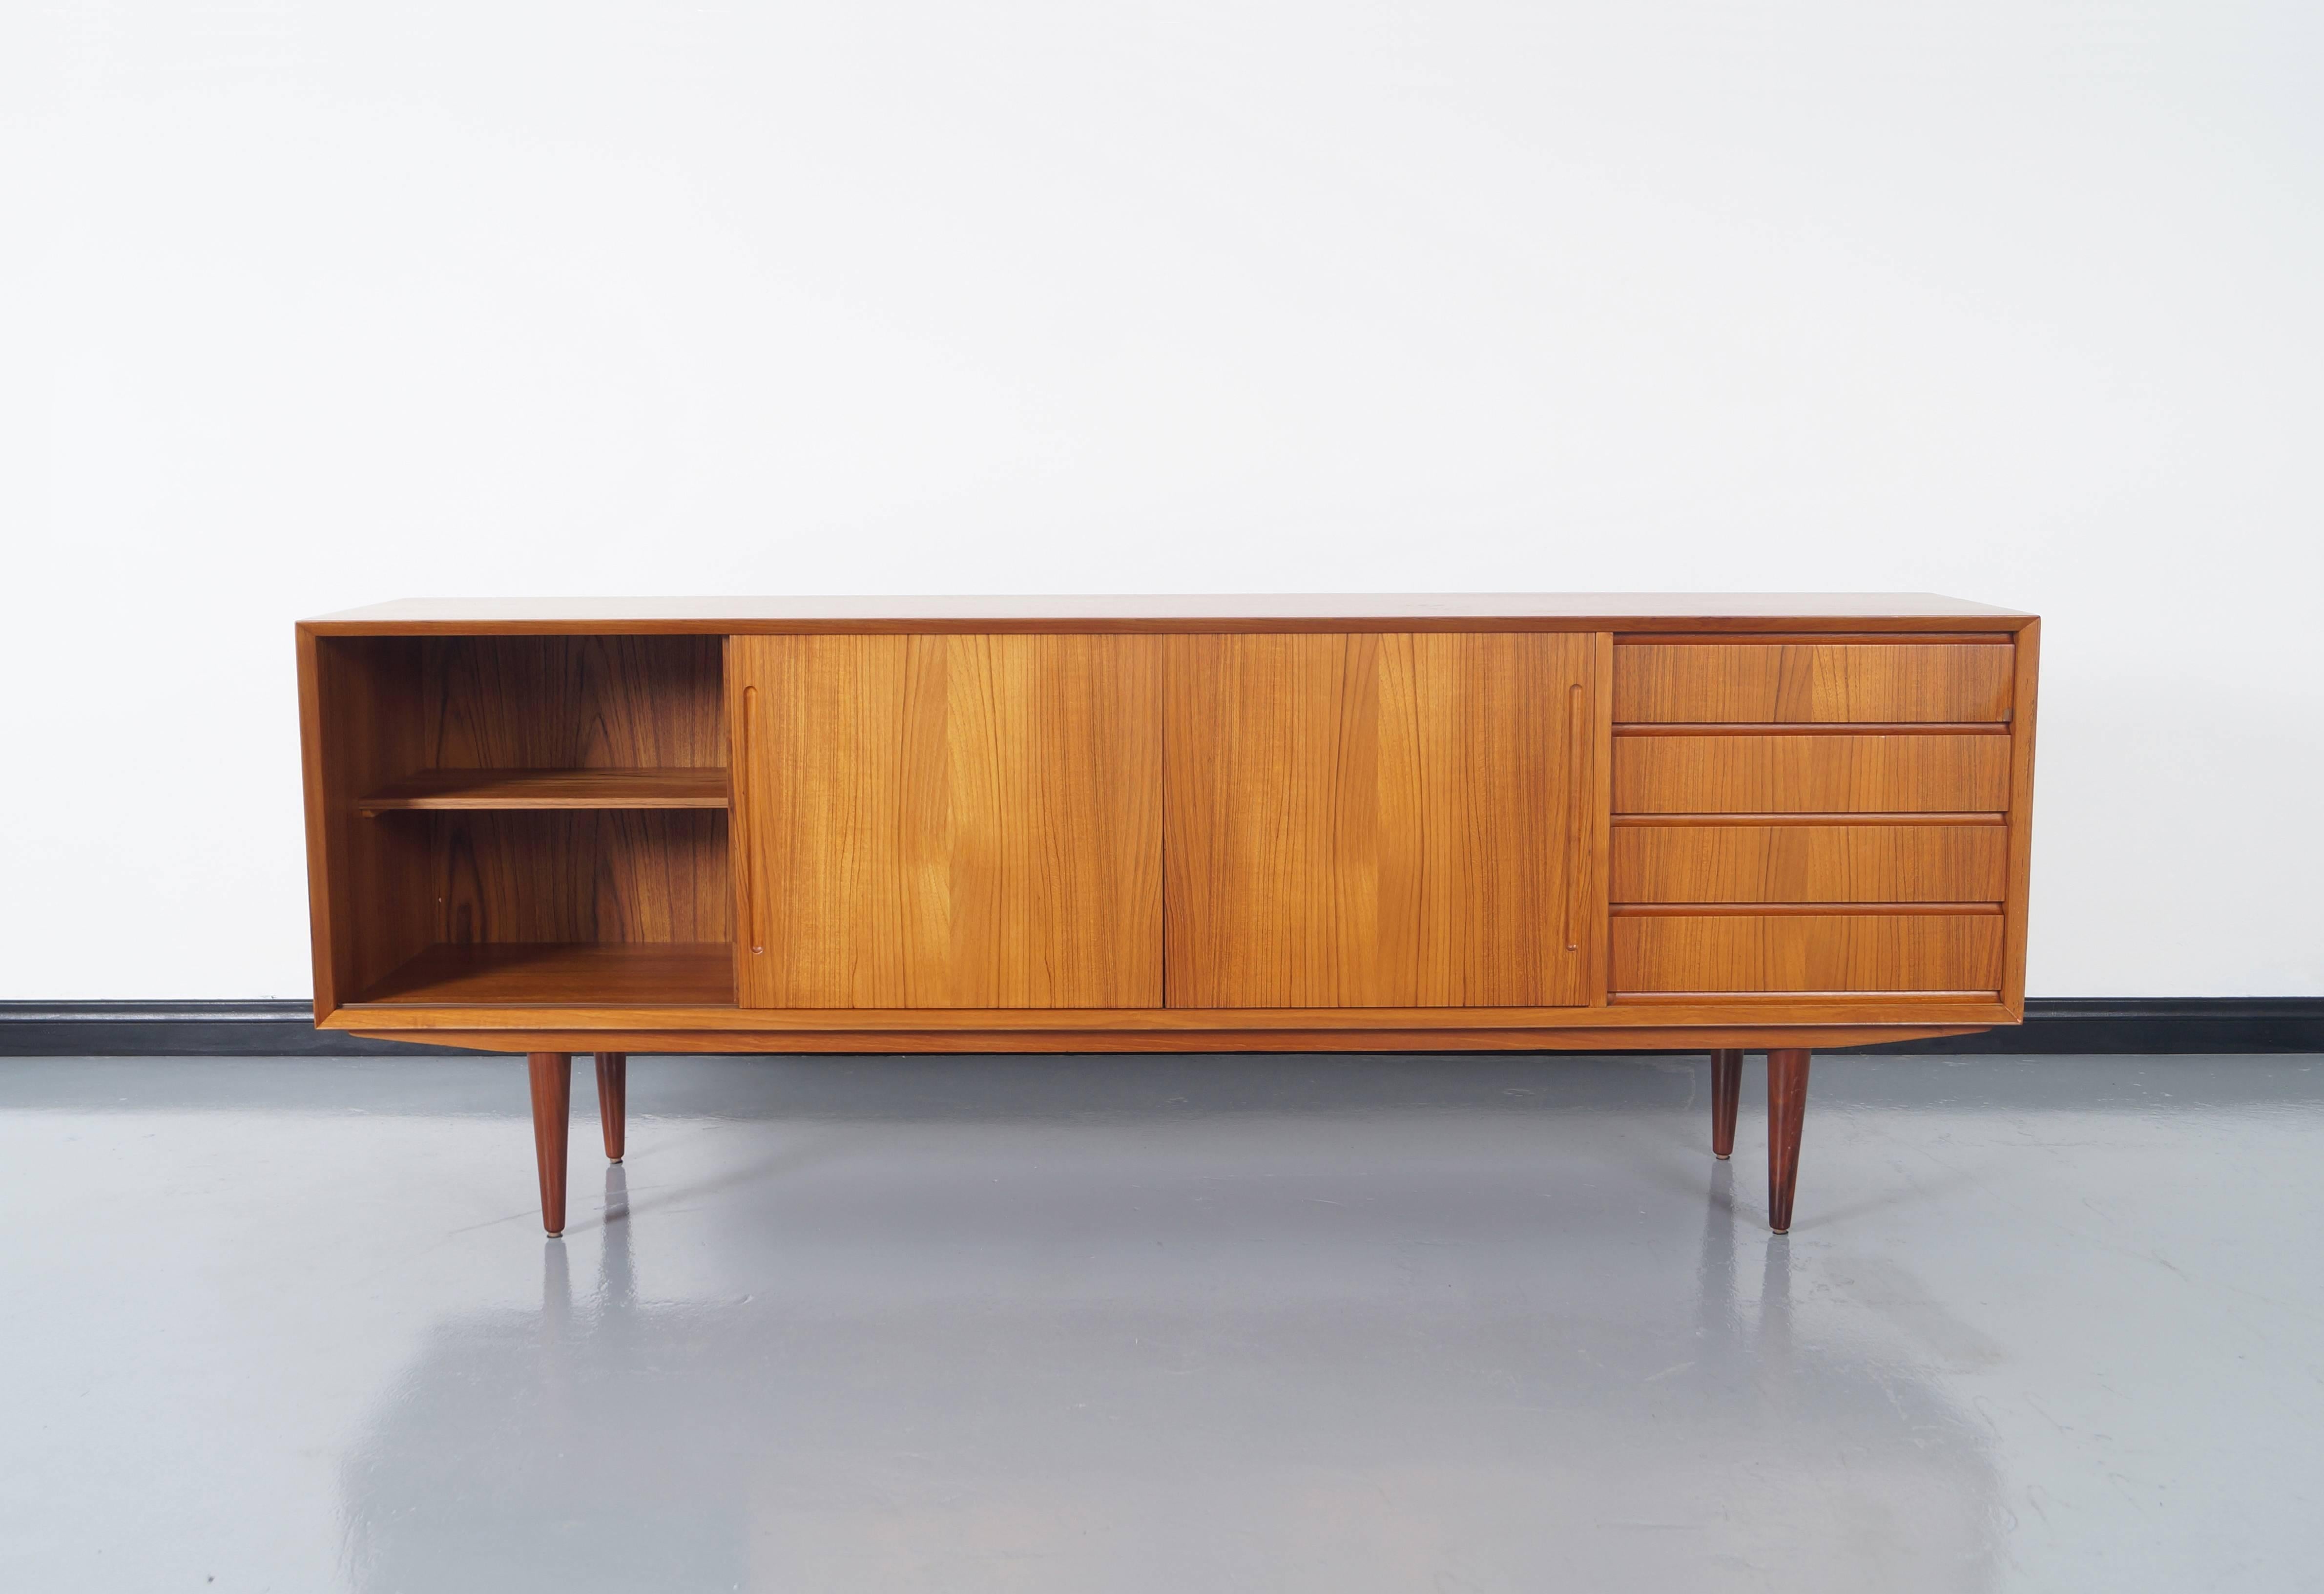 Amazing Danish modern teak sideboard by Alderslyst Møbelfabrik. This piece features with sliding doors and one adjustable shelf on the left side. The right side has four pull-out drawers for added storage.